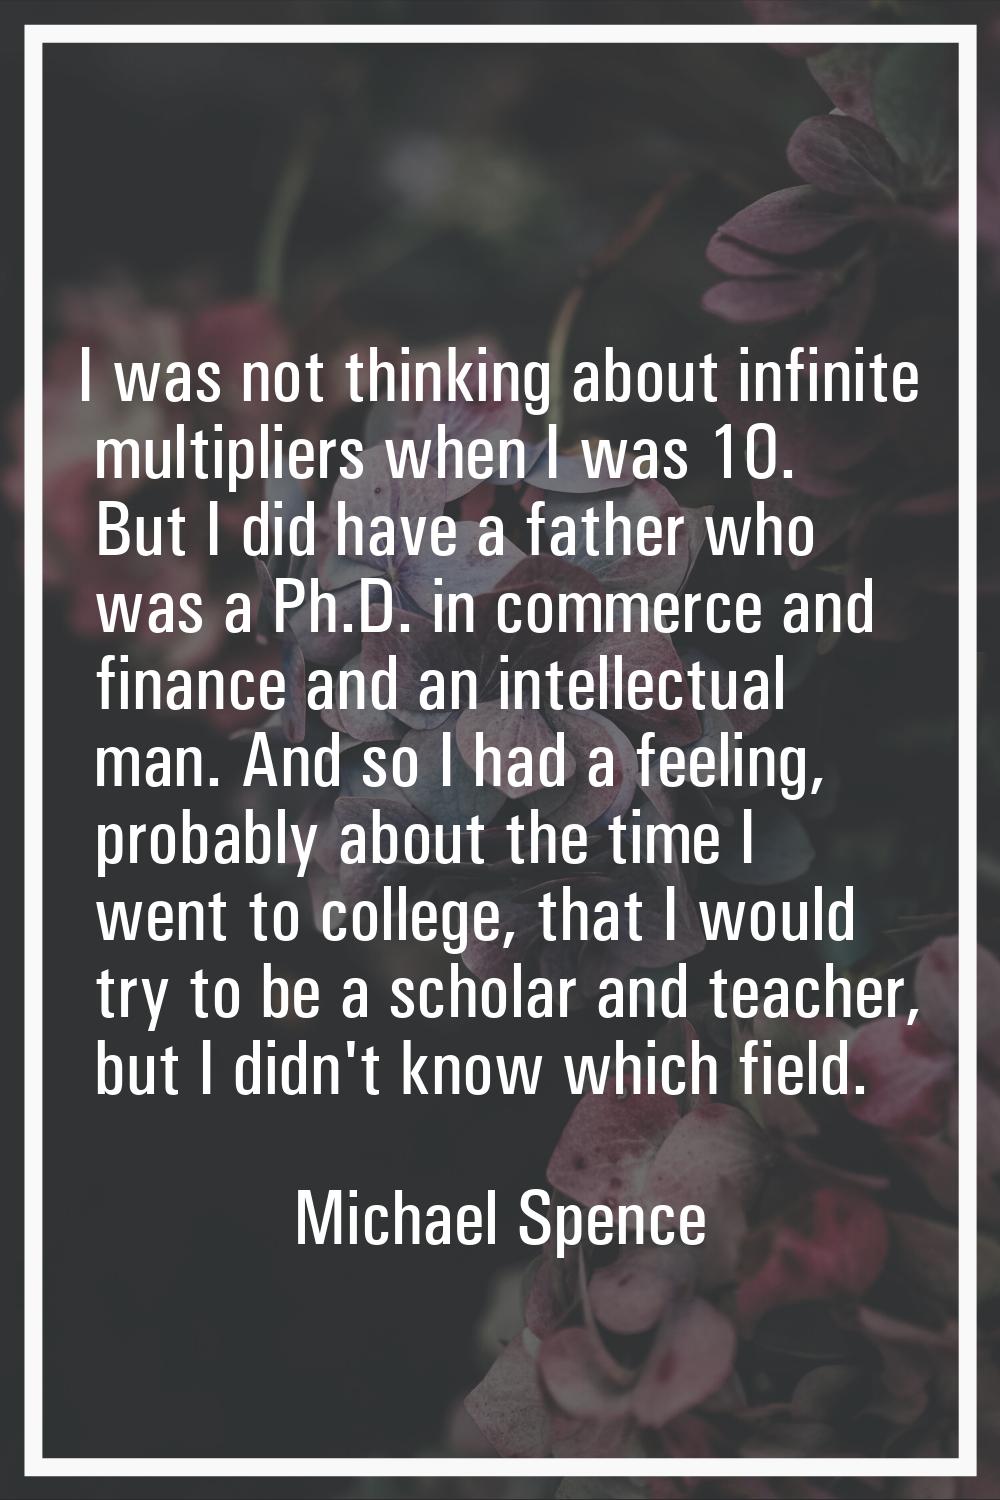 I was not thinking about infinite multipliers when I was 10. But I did have a father who was a Ph.D